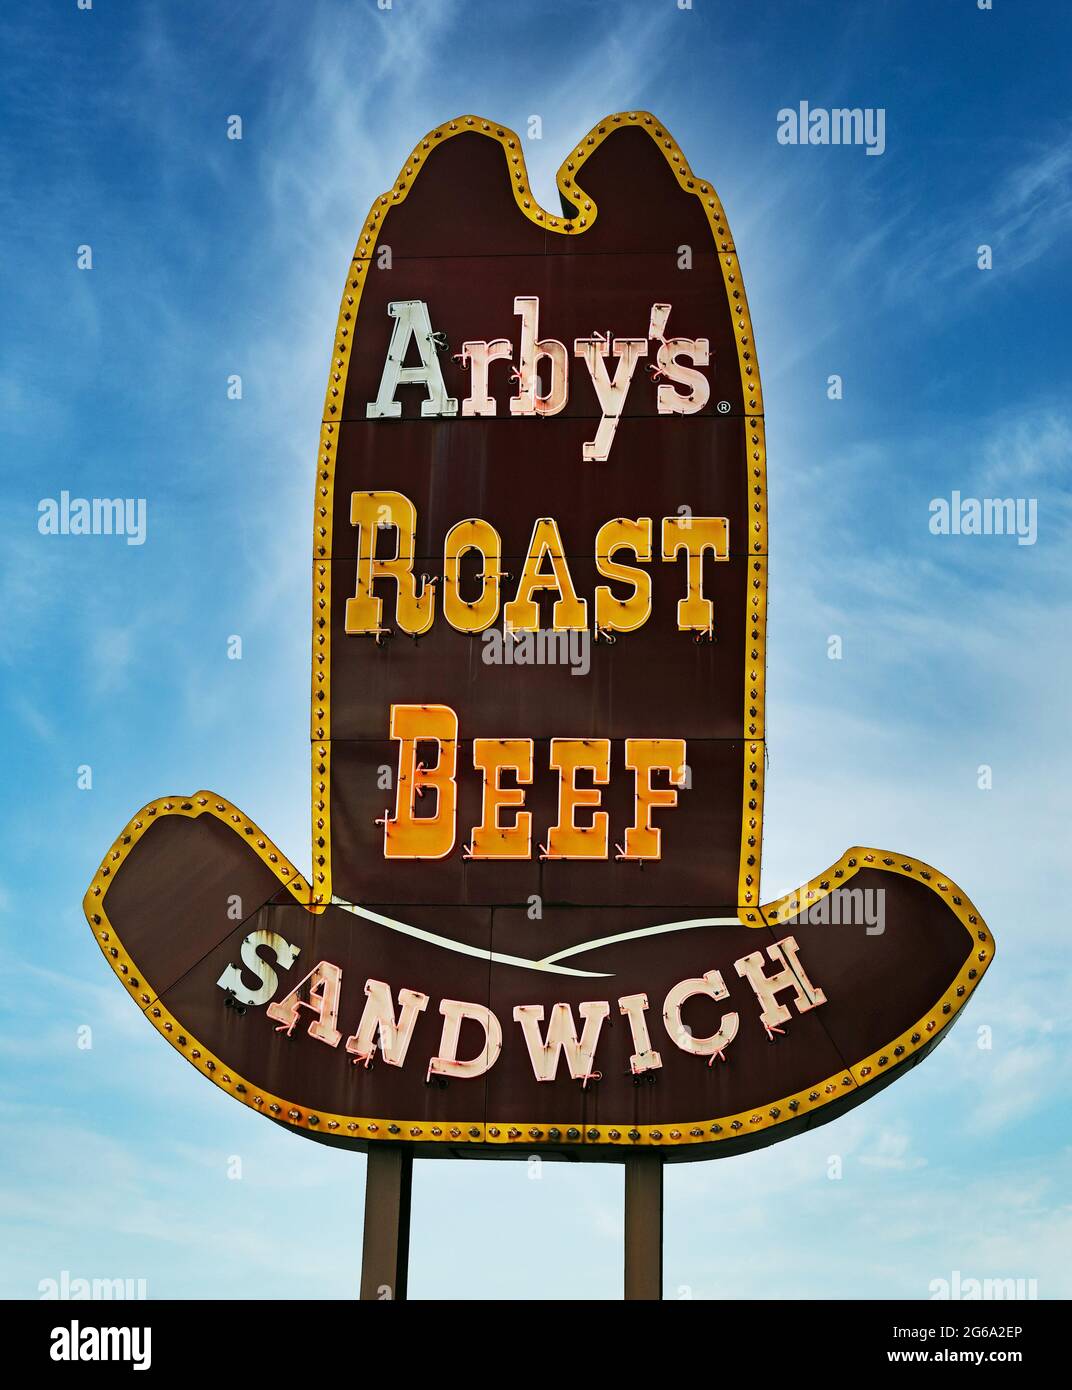 The iconic Arby's Roast Beef sign in Laurel, Maryland. Stock Photo